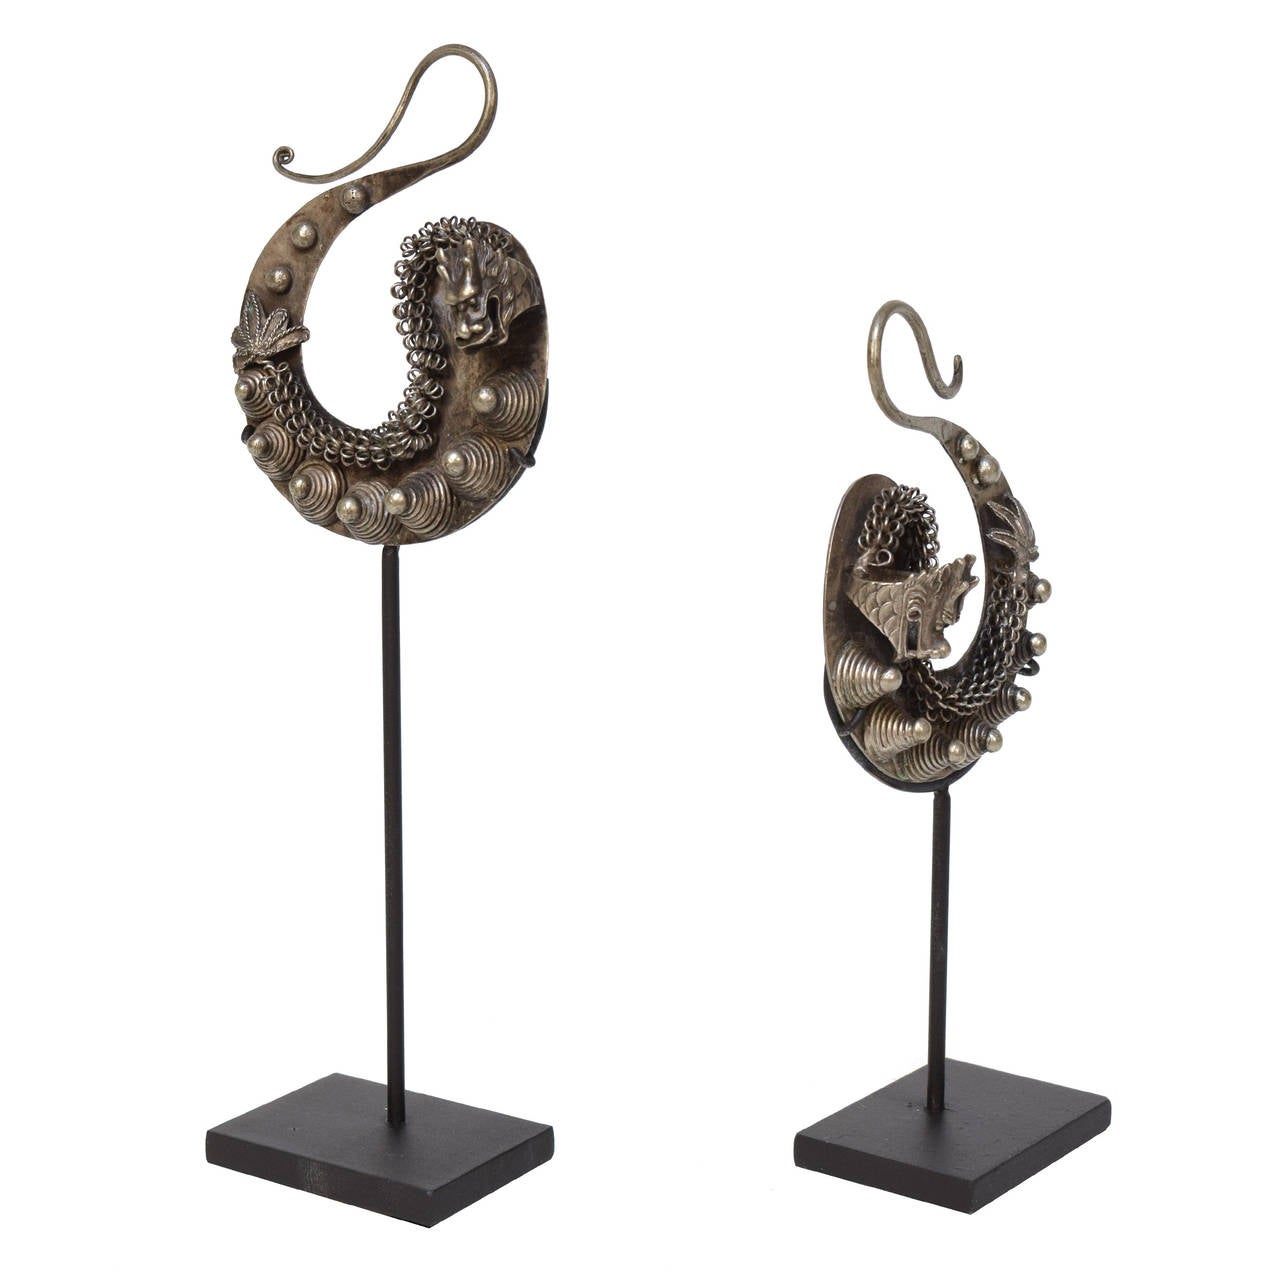 A pair of silver dragon earrings from Guizhou Province, China on custom made stands. These c. 1900 pieces were crafted by the Miao people, one of the official minority groups in China.